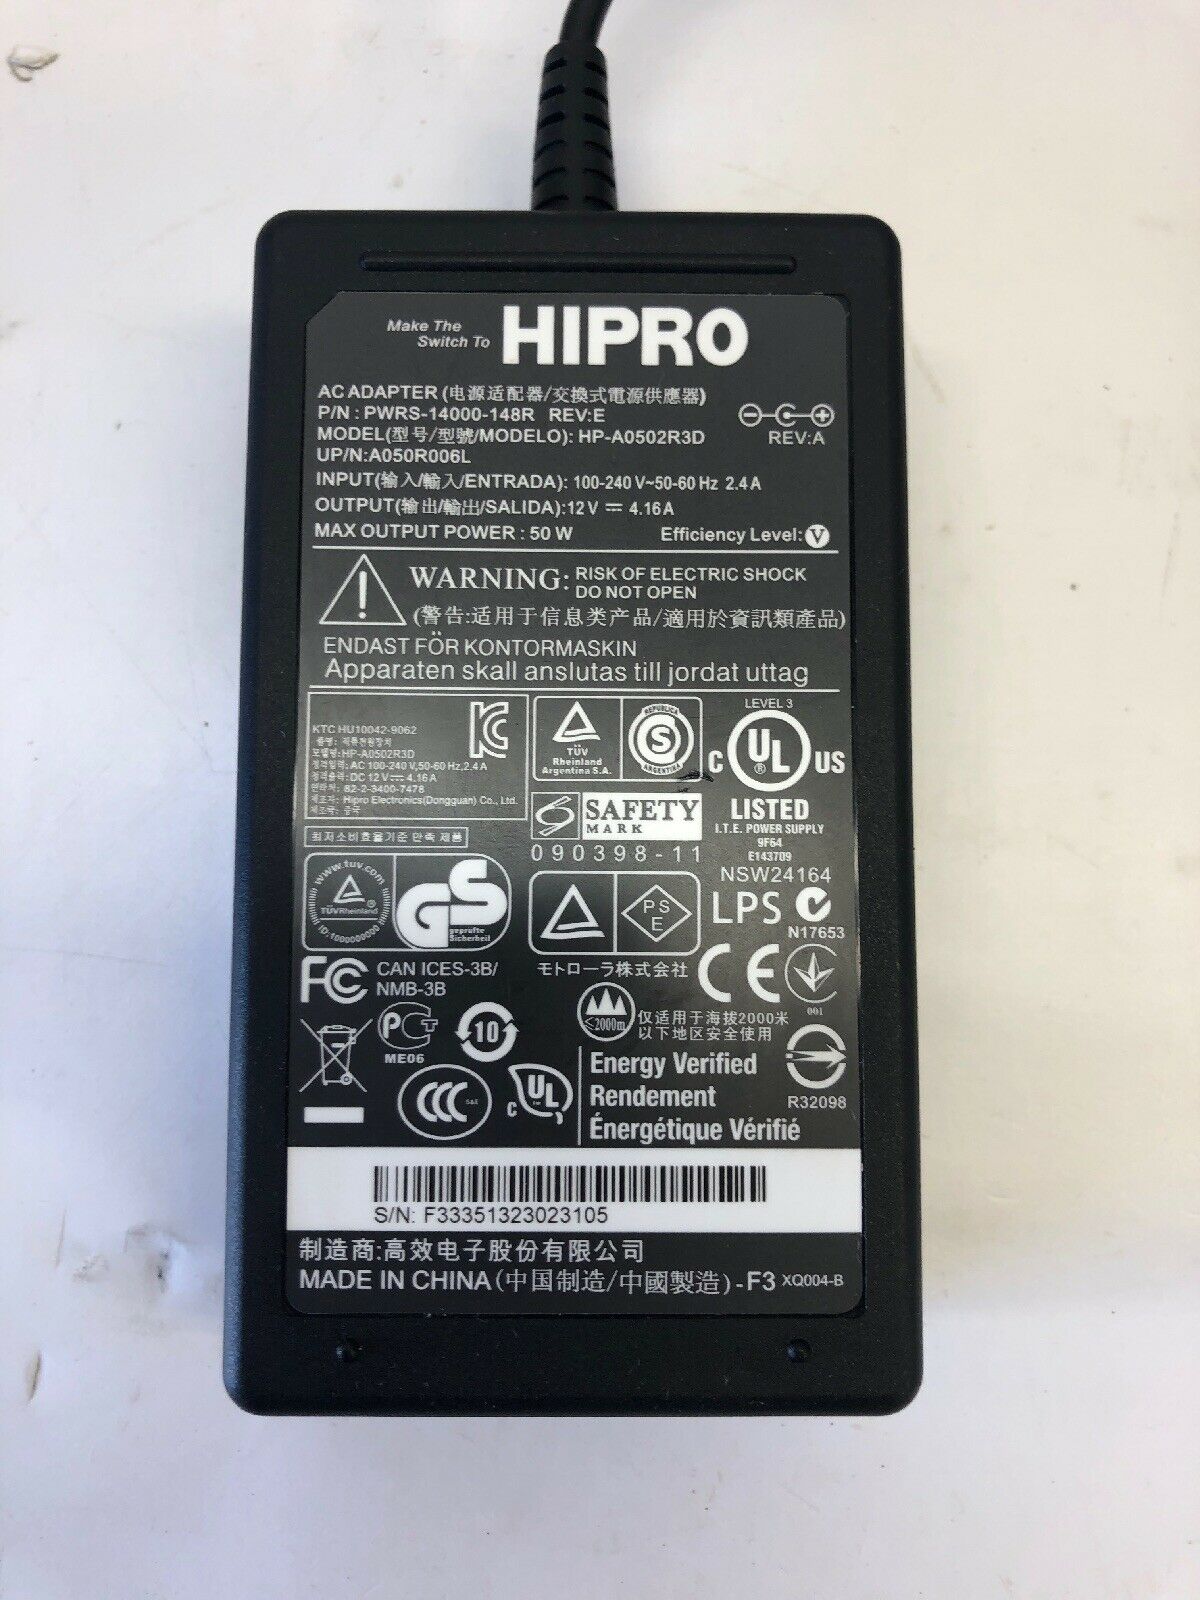 Genuine HIPRO A(HP-A0502R3D) REV:A - 12V 4.16A 50W AC Model: HiPro Bundled Items: Power Cable Max. Output Power: 4